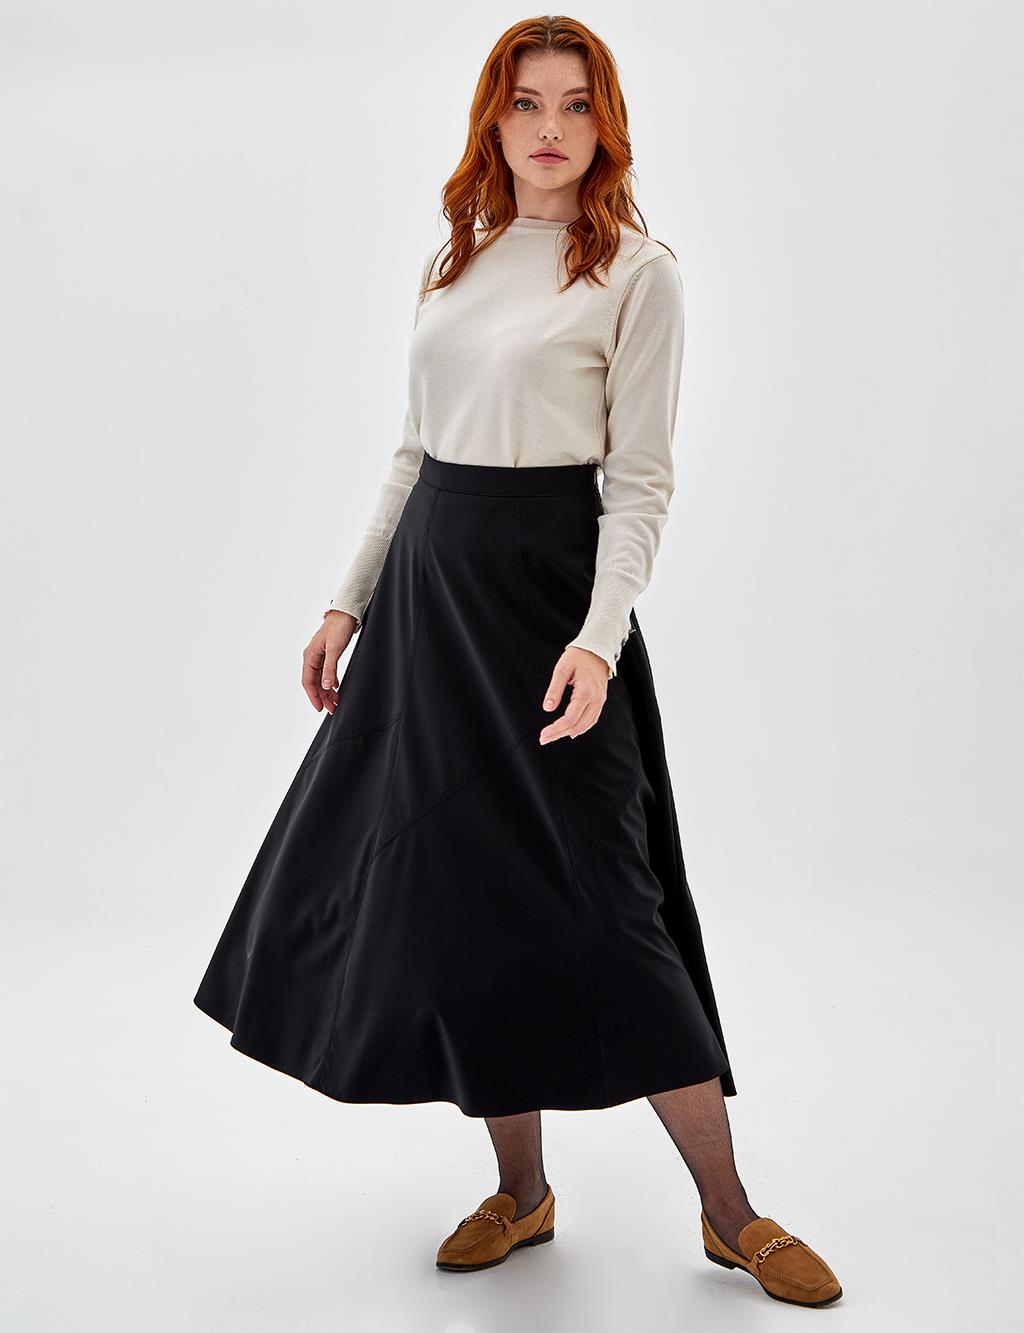 Leather Look A-Line Skirt Black